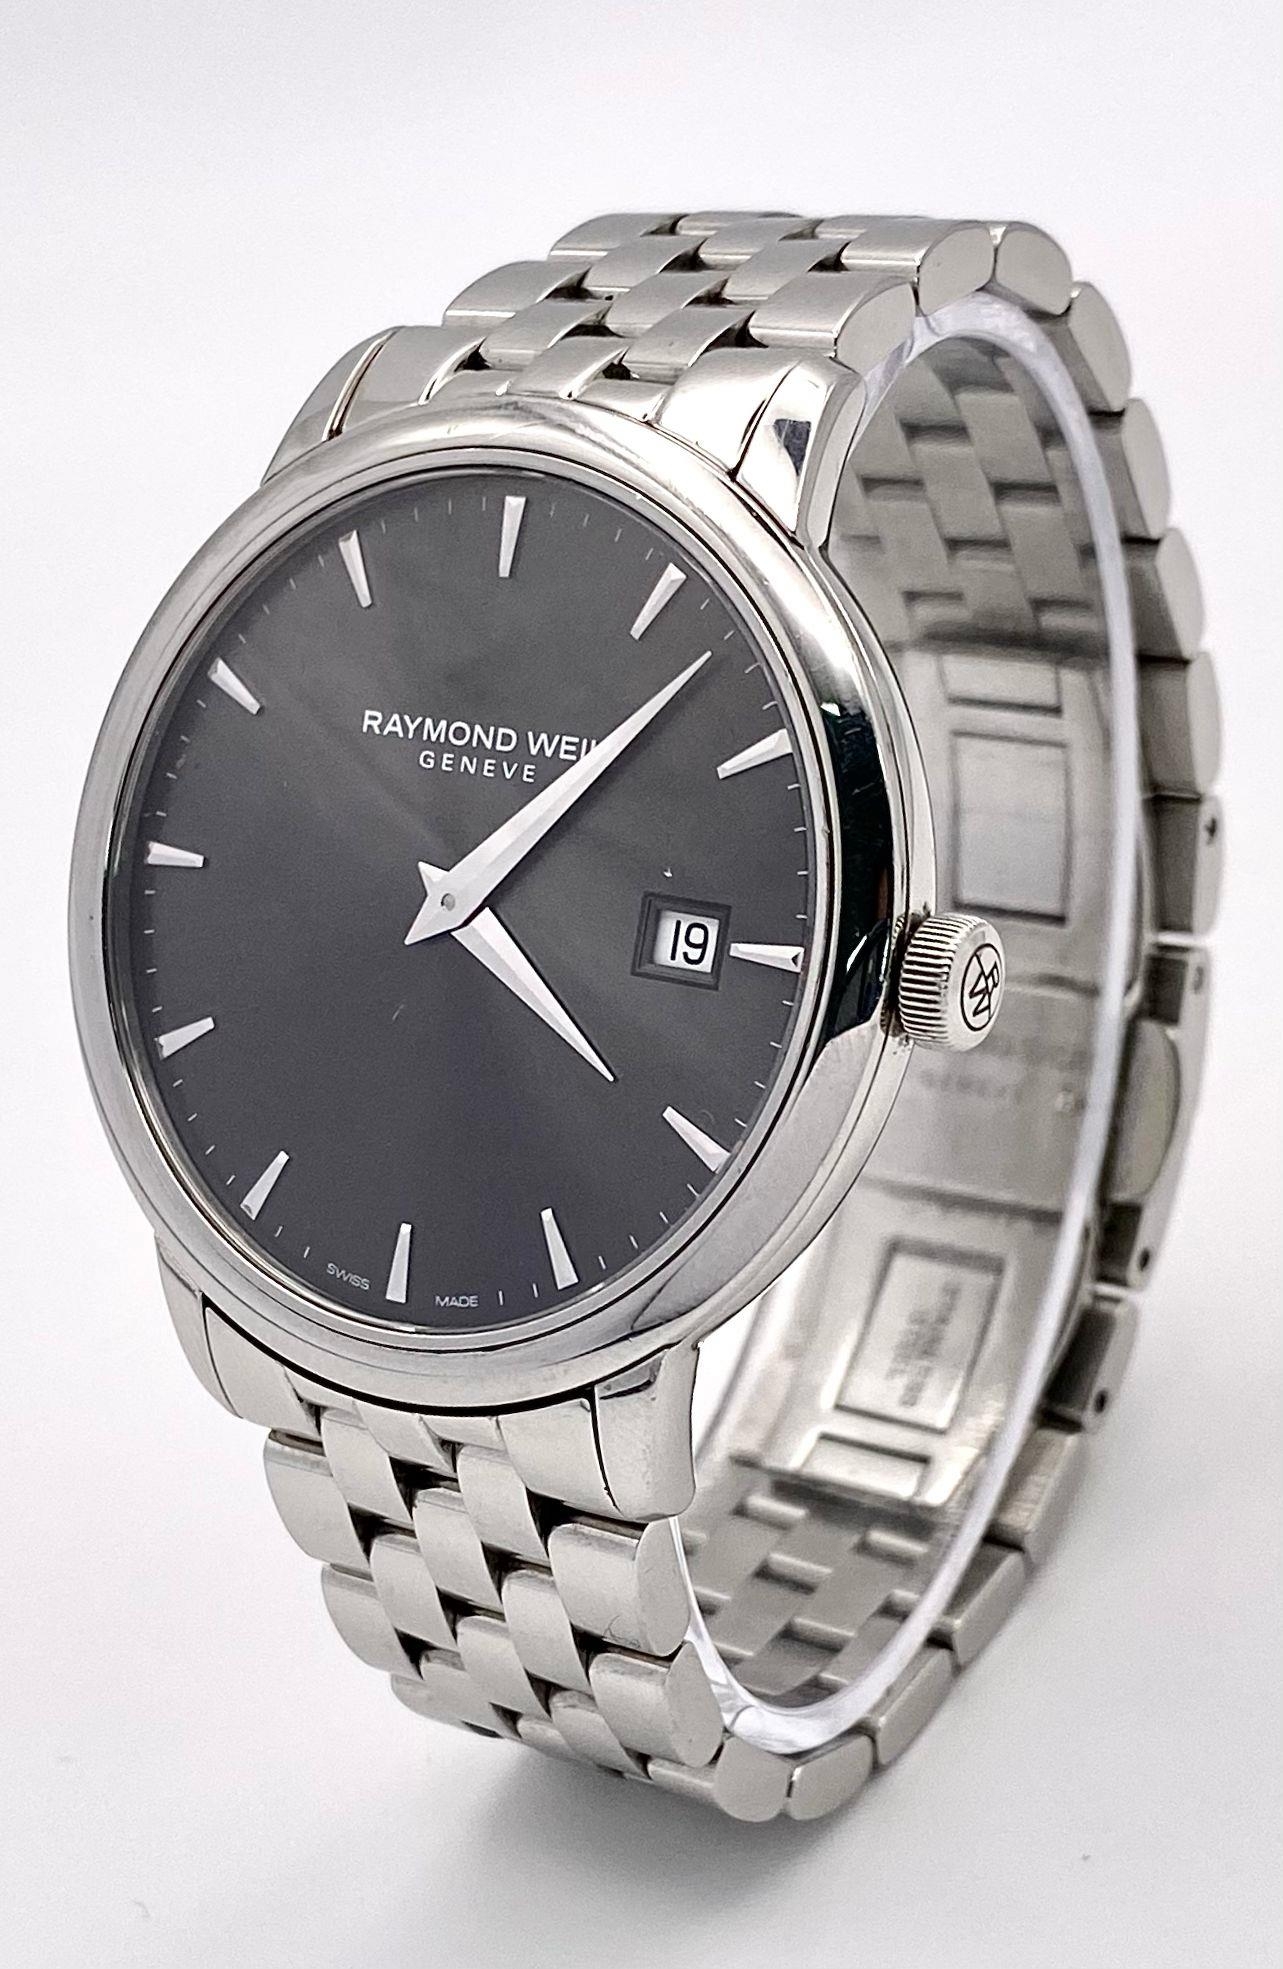 A Classic Raymond Weil Geneve Quartz Gents Watch. Stainless steel bracelet and case - 39mm. Silver - Image 3 of 10